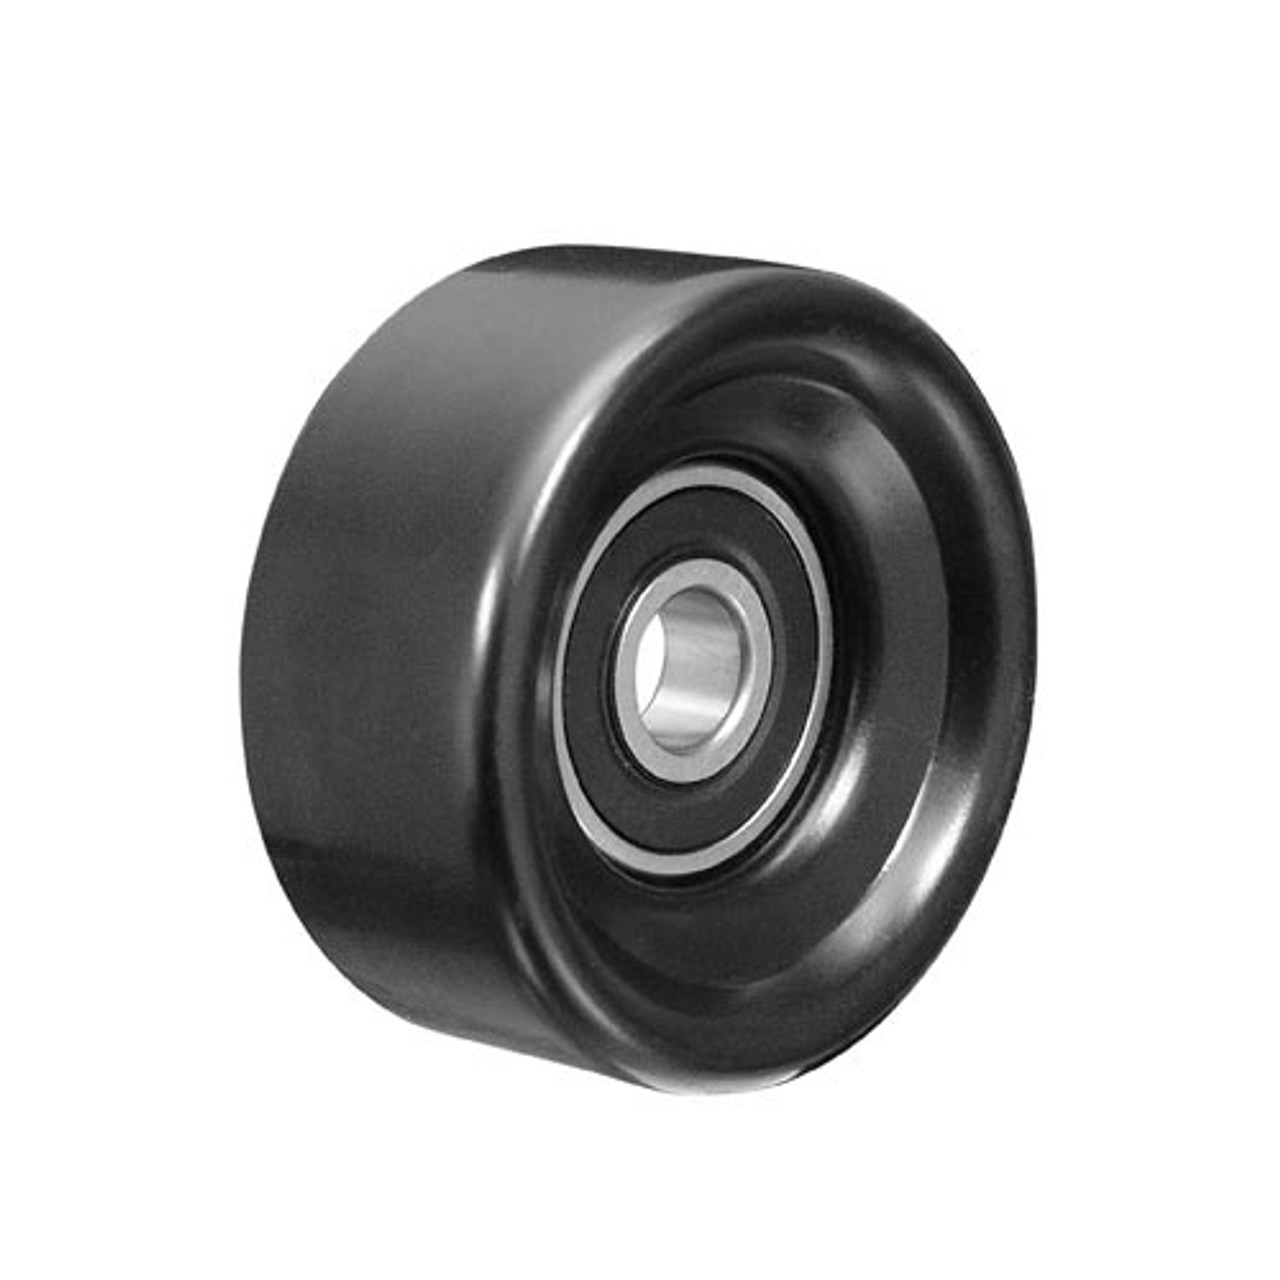 Dayco 6.7L Powerstroke Smooth Pulley